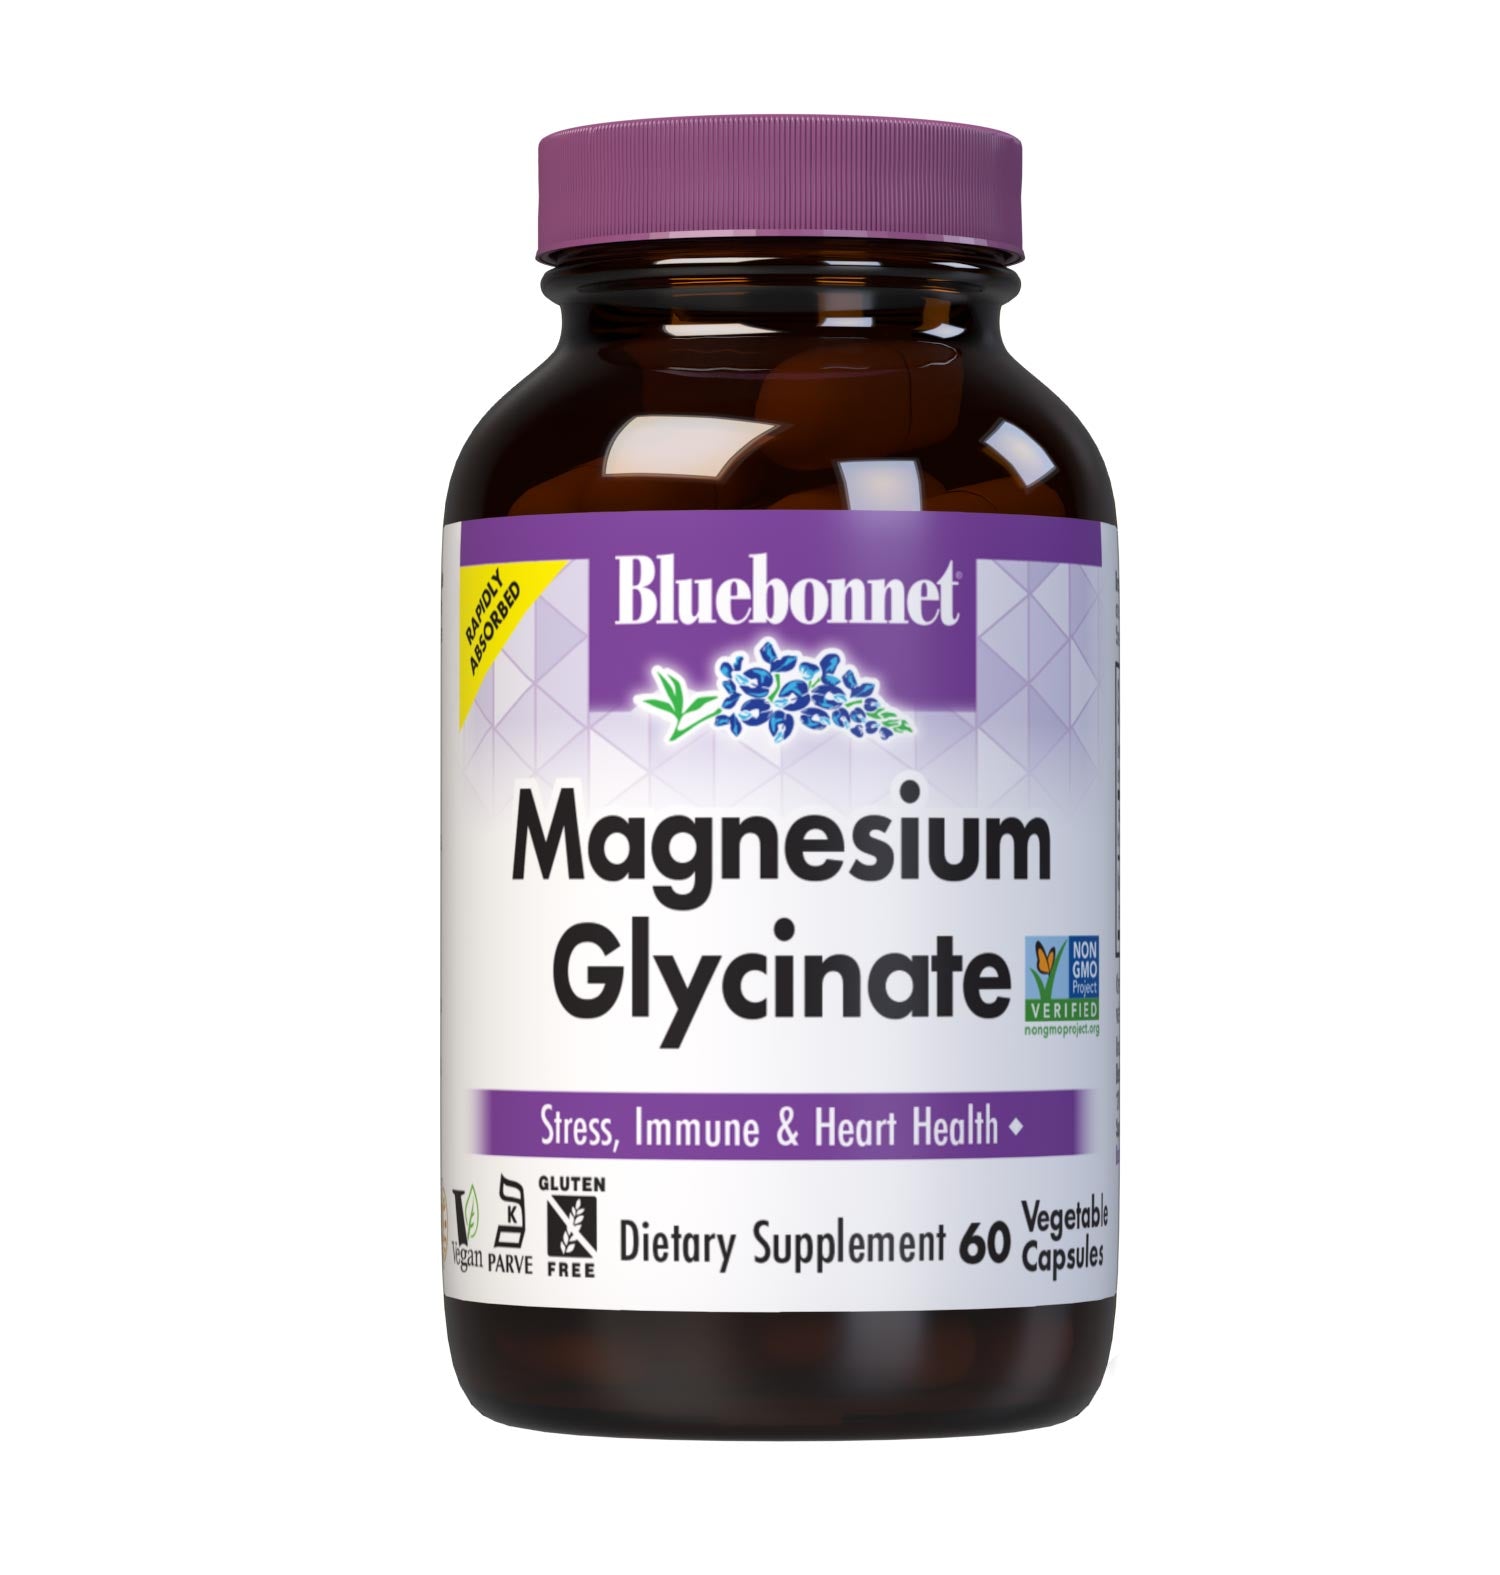 Bluebonnet’s Magnesium Glycinate 60 Vegetable Capsules are formulated with 400 mg per serving of elemental magnesium from fully reacted magnesium glycinate, a more rapidly absorbed amino acid mineral complex from Albion. Magnesium supports energy production and is critical for enzyme function. Available in easy-to-swallow vegetable capsules for maximum assimilation and absorption. #size_60 count